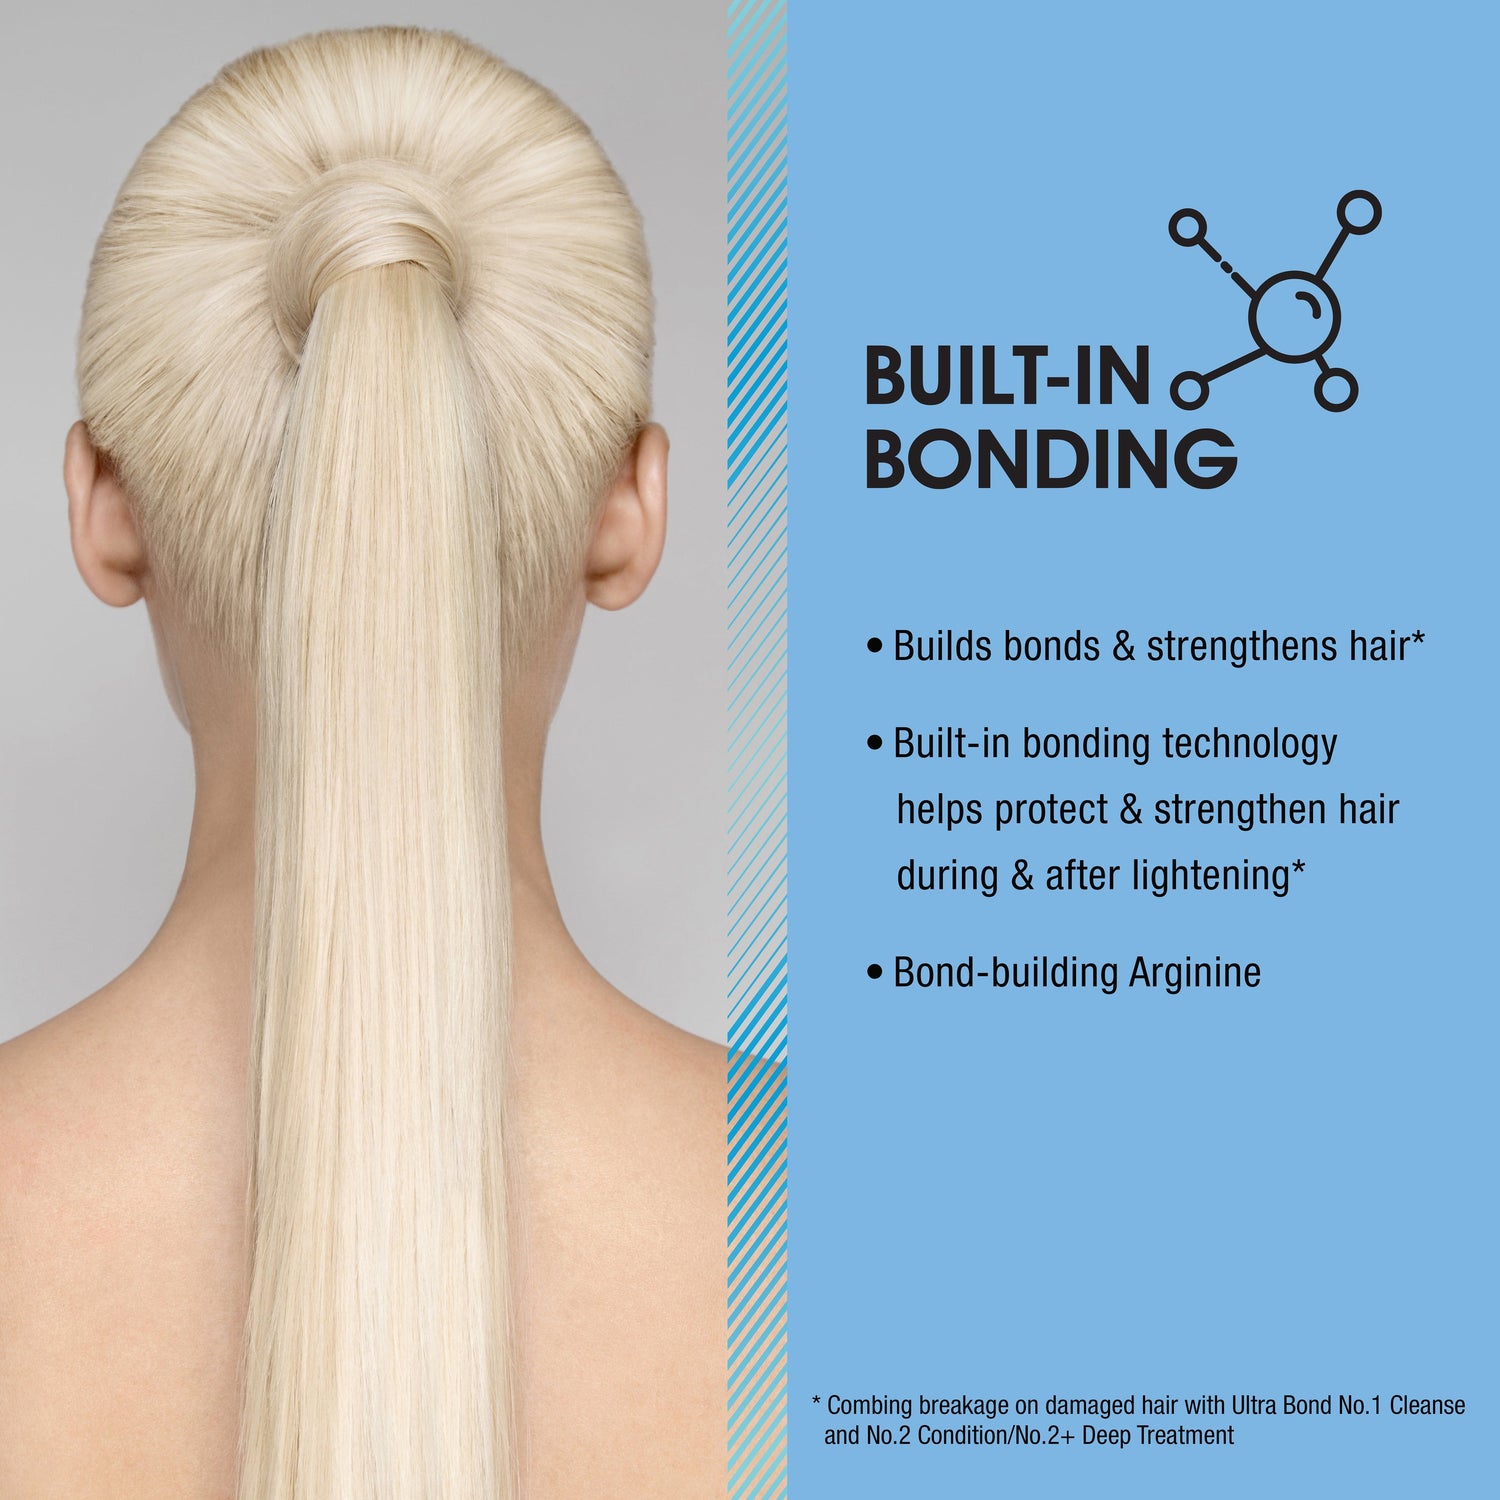 AGEbeautiful® Ultra Bond ™ No. 1 Blonde Care Purple Shampoo+ has built in bonding technology to help protect & strengthen hair during and after lightening